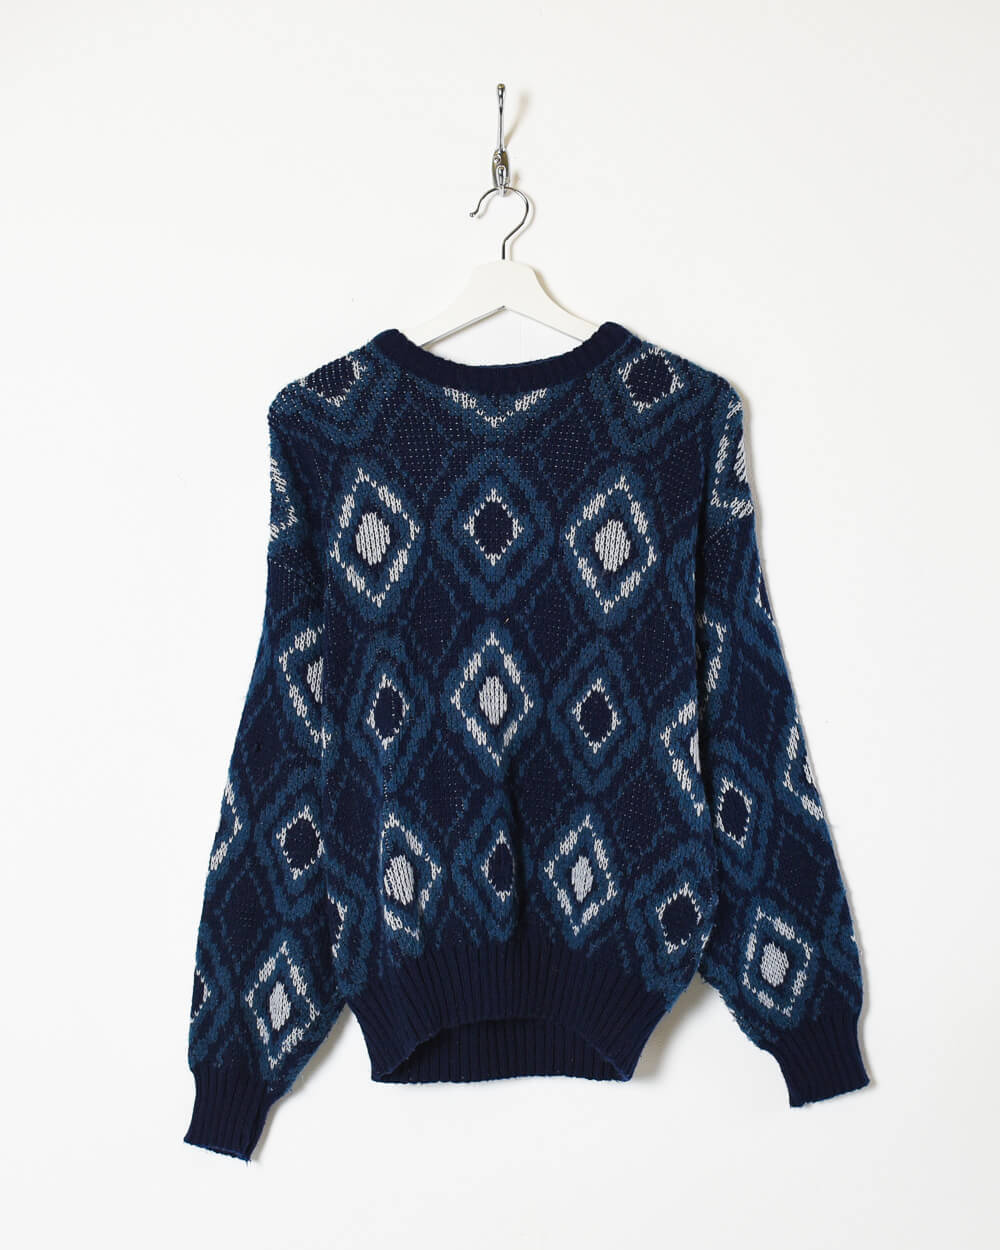 Navy Vintage Knitted Sweatshirt - Small